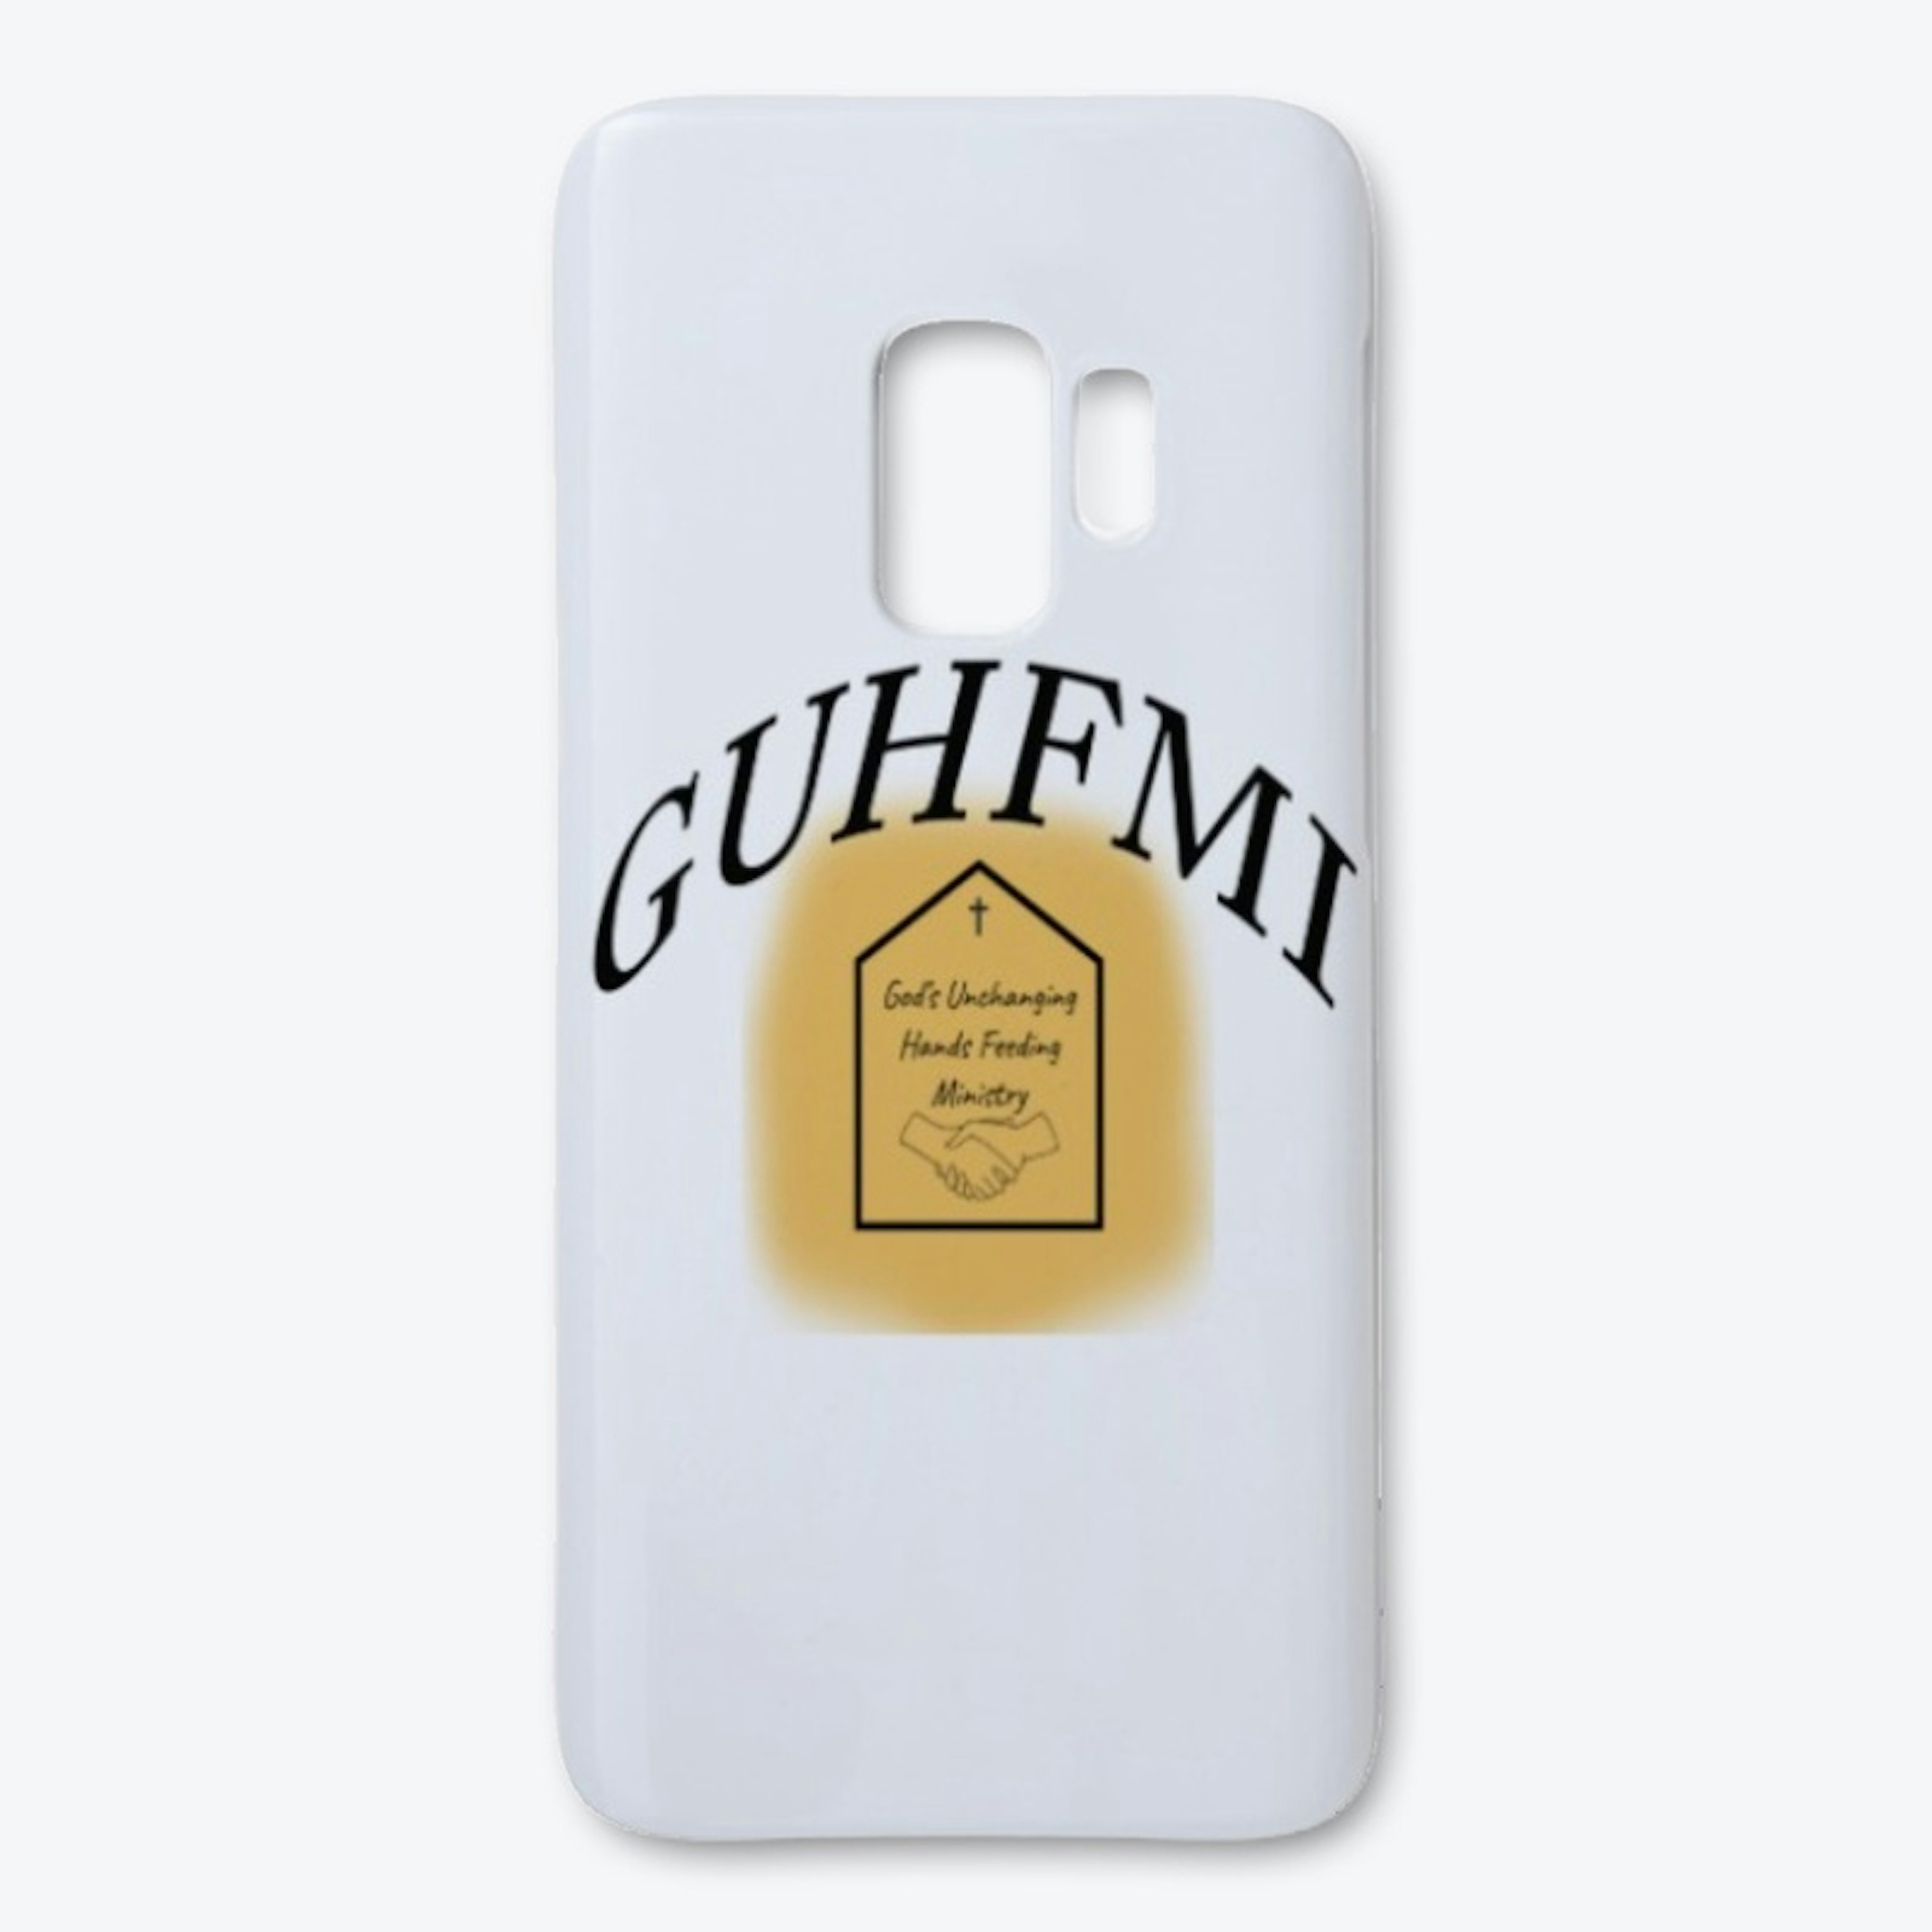 GUHFMI White and Gold Collection